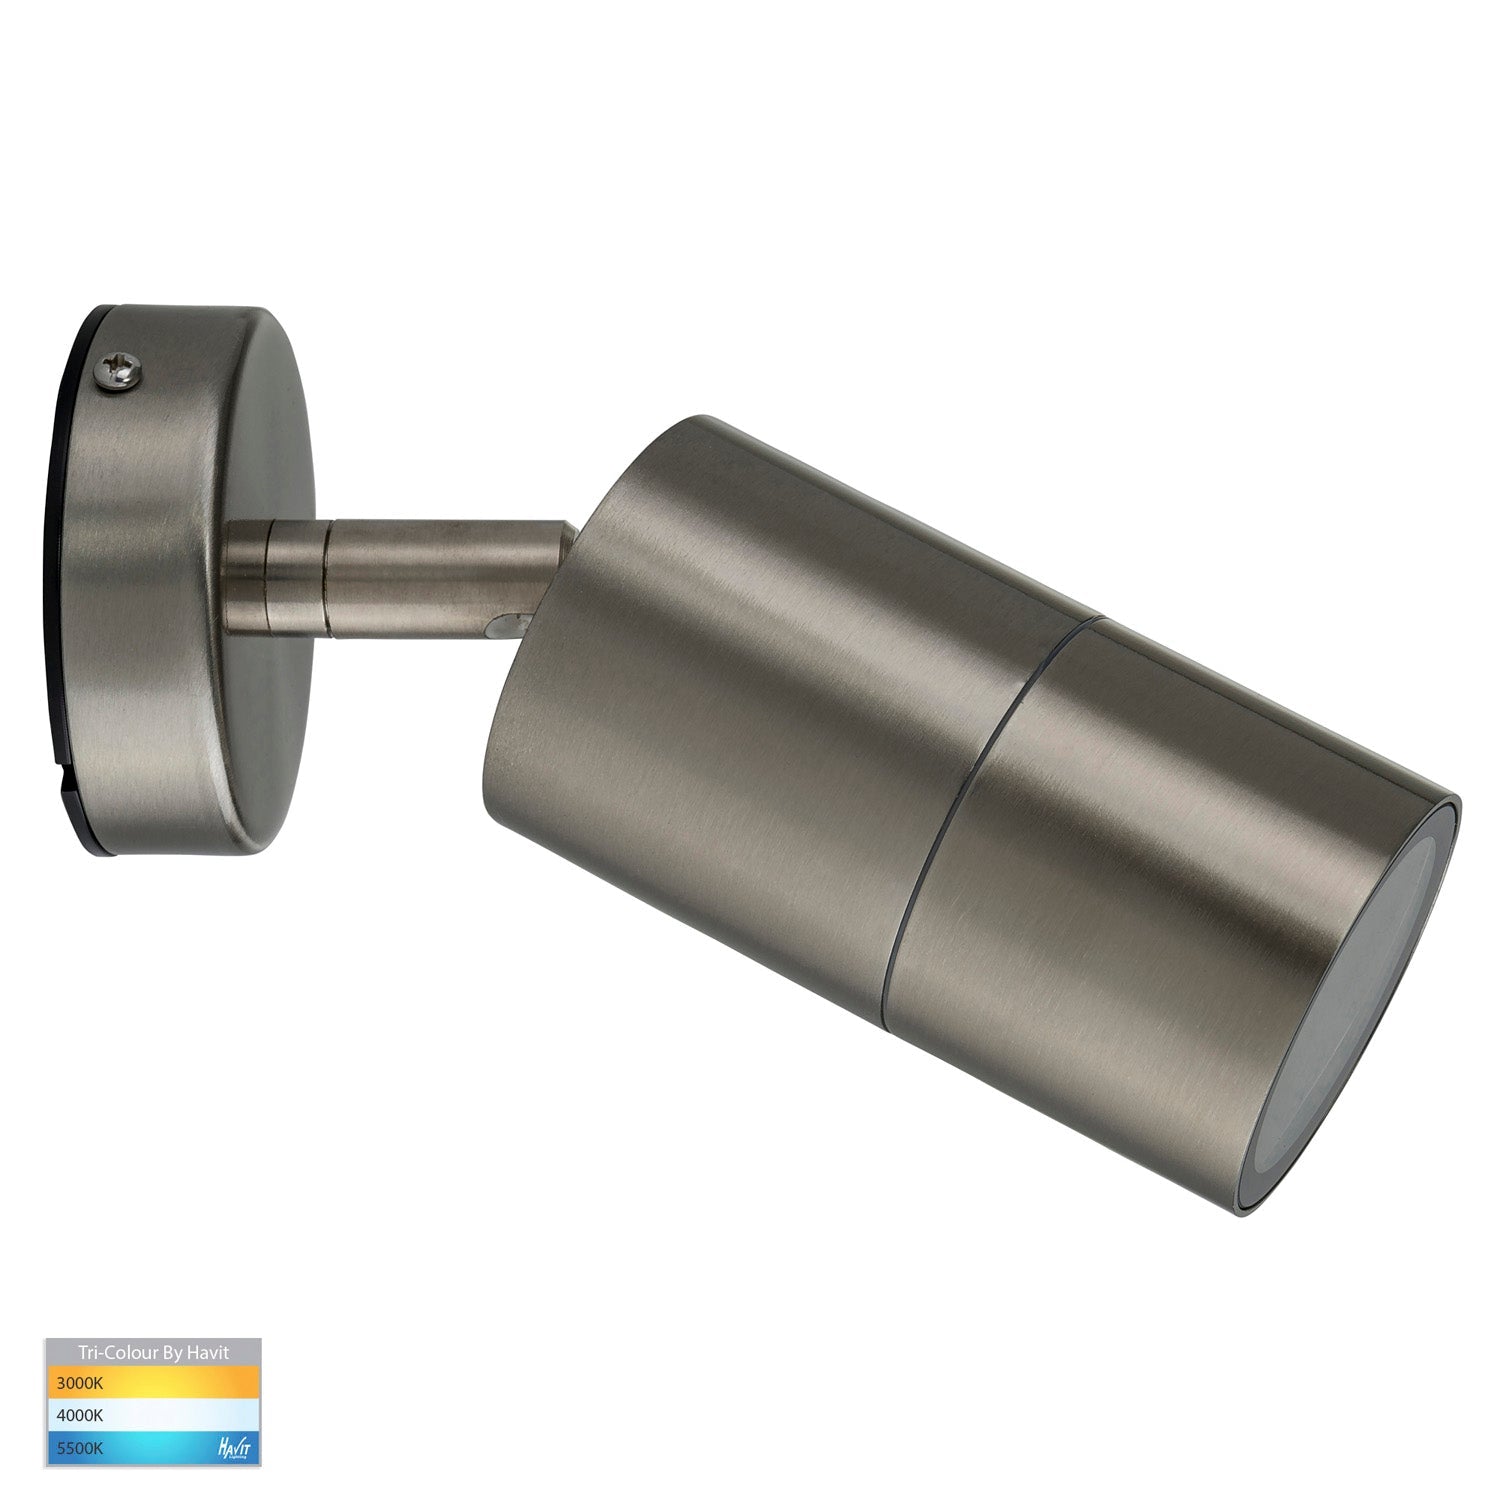 Stainless Steel Adjustable Wall Light Fortis Havit Lighting - HV1272T - Mases LightingHavit Lighting